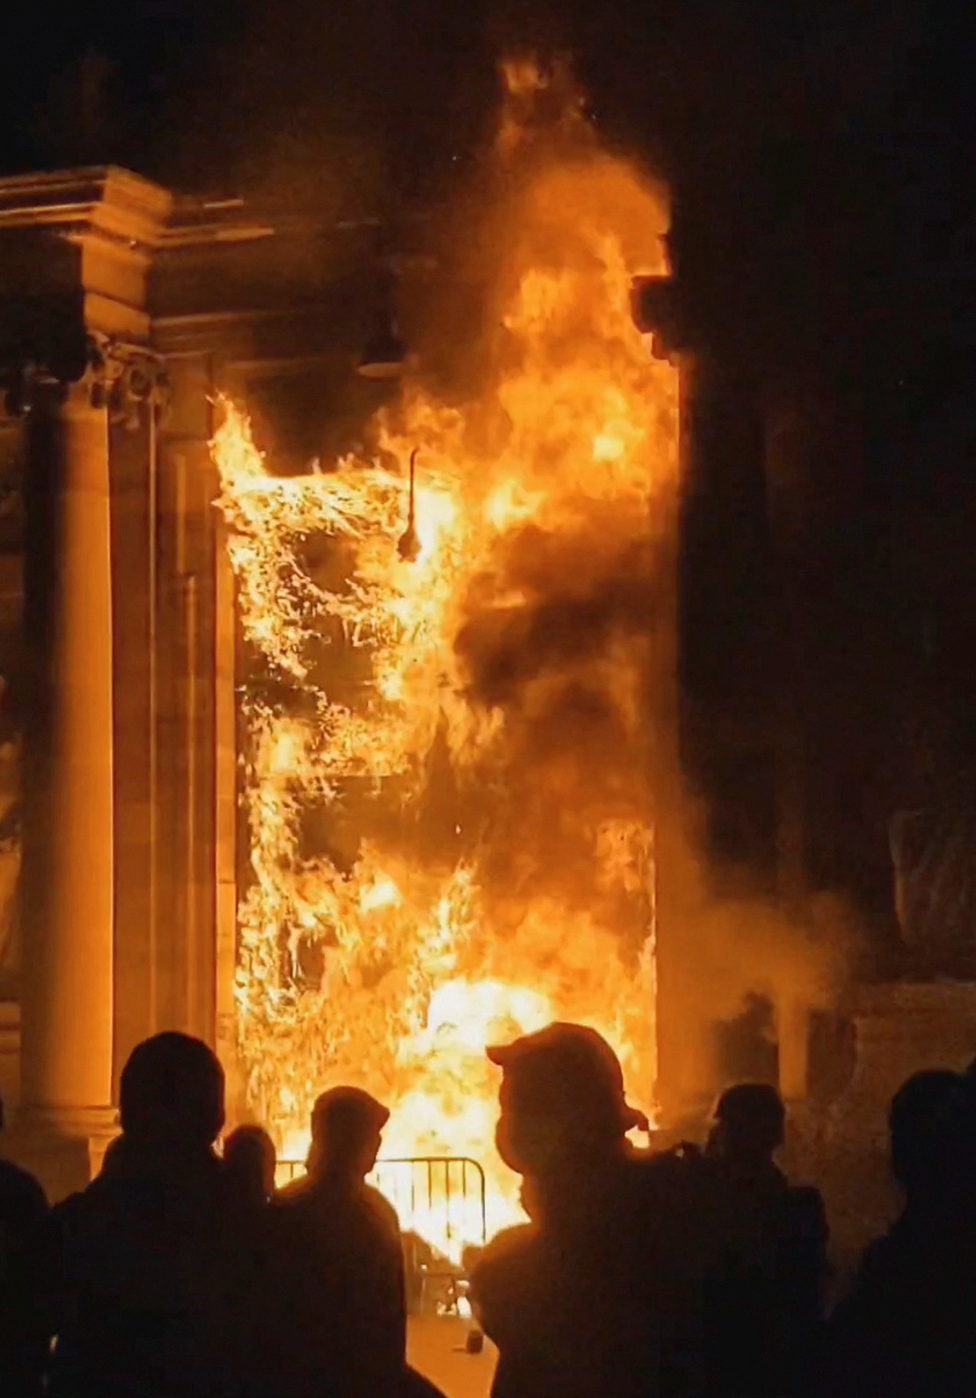 People look at the Bordeaux town hall in flames during a demonstration as part of the ninth day of nationwide strikes and protests against the French government's pension reform, in Bordeaux, France, March 23, 2023, in this screengrab obtained from a social media video.